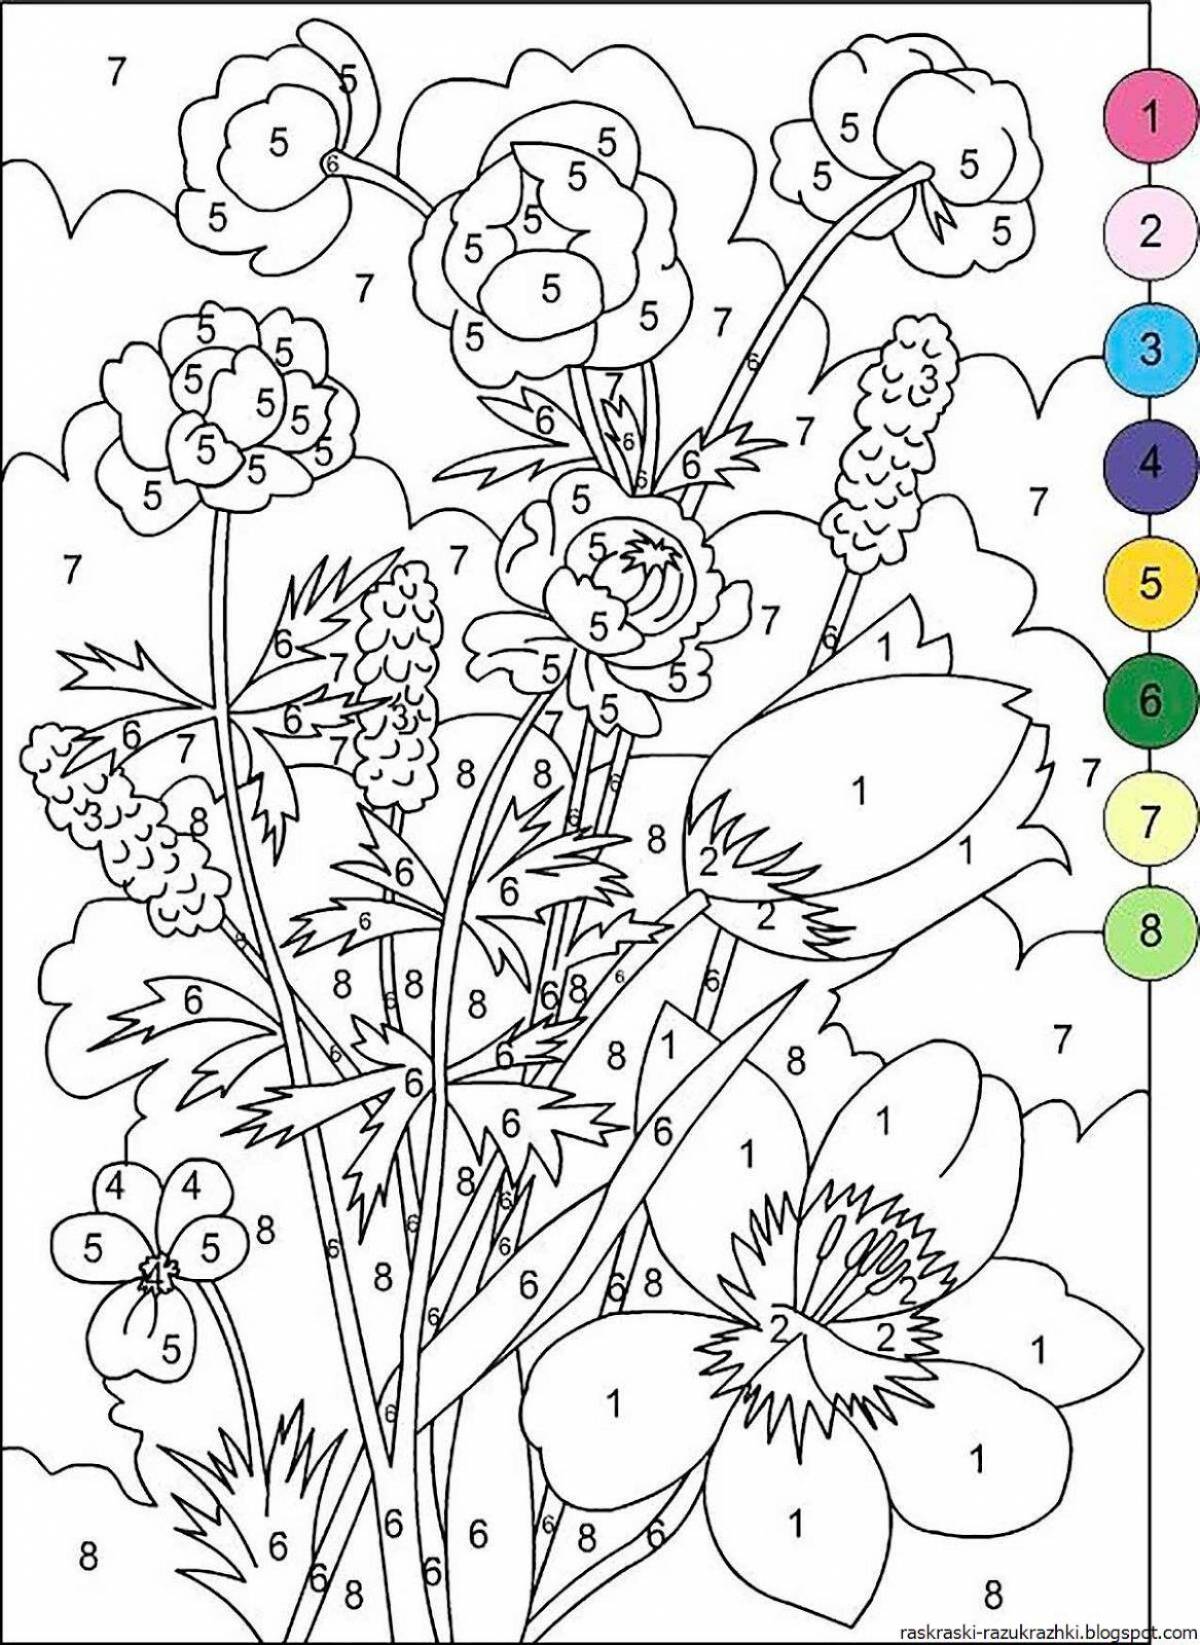 Beautiful flowers coloring book for children 6-7 years old